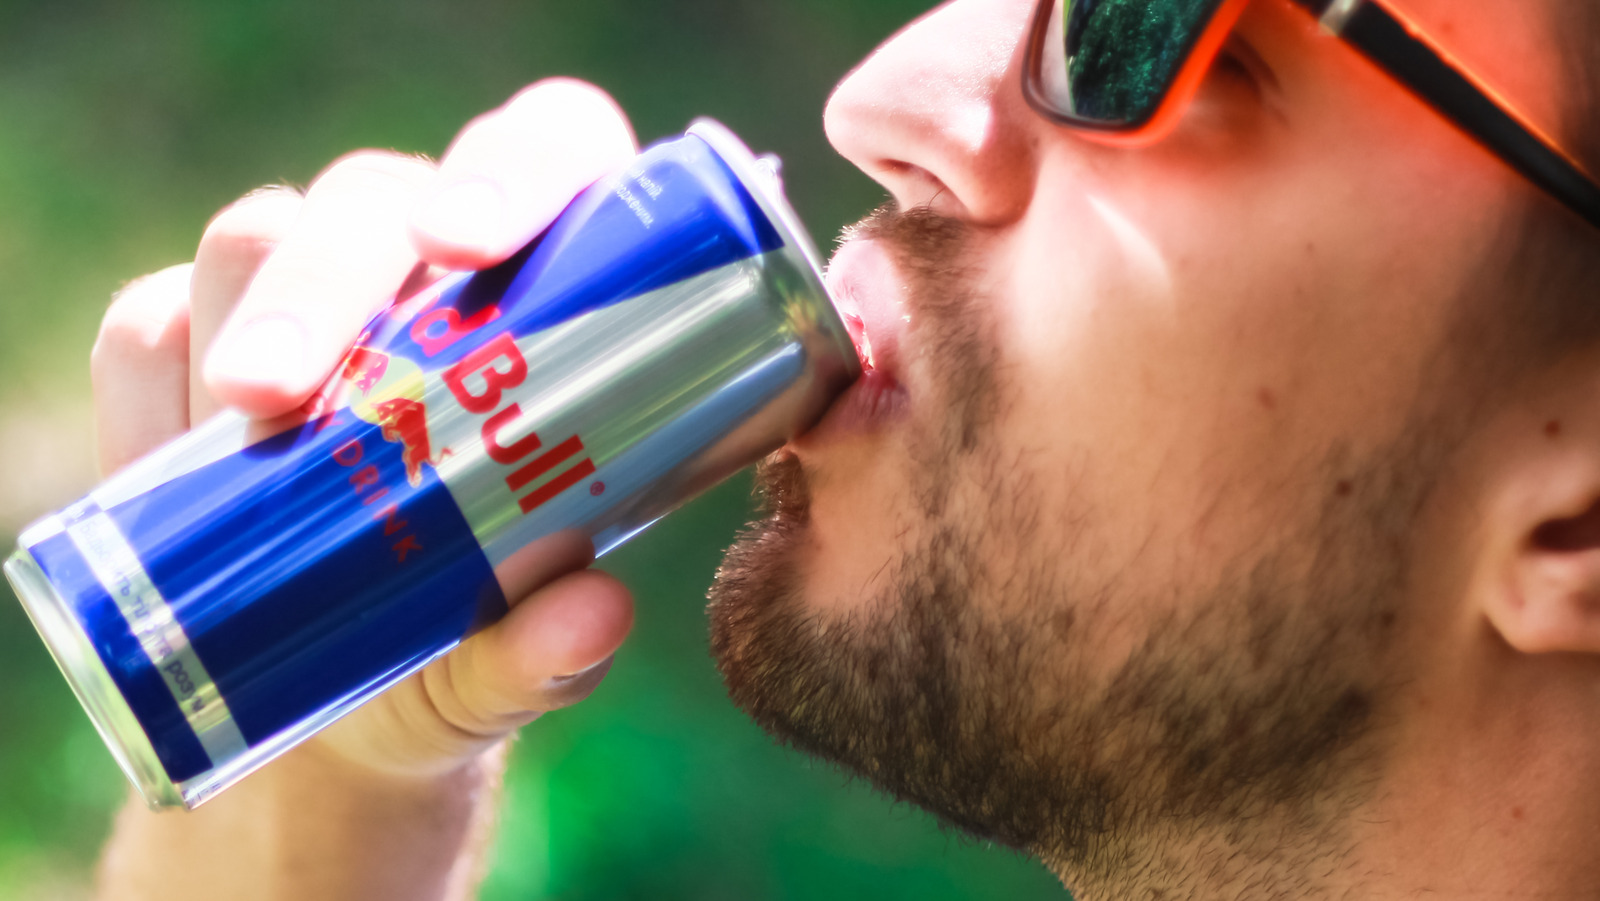 How Bad Is Red Bull For Your Health?